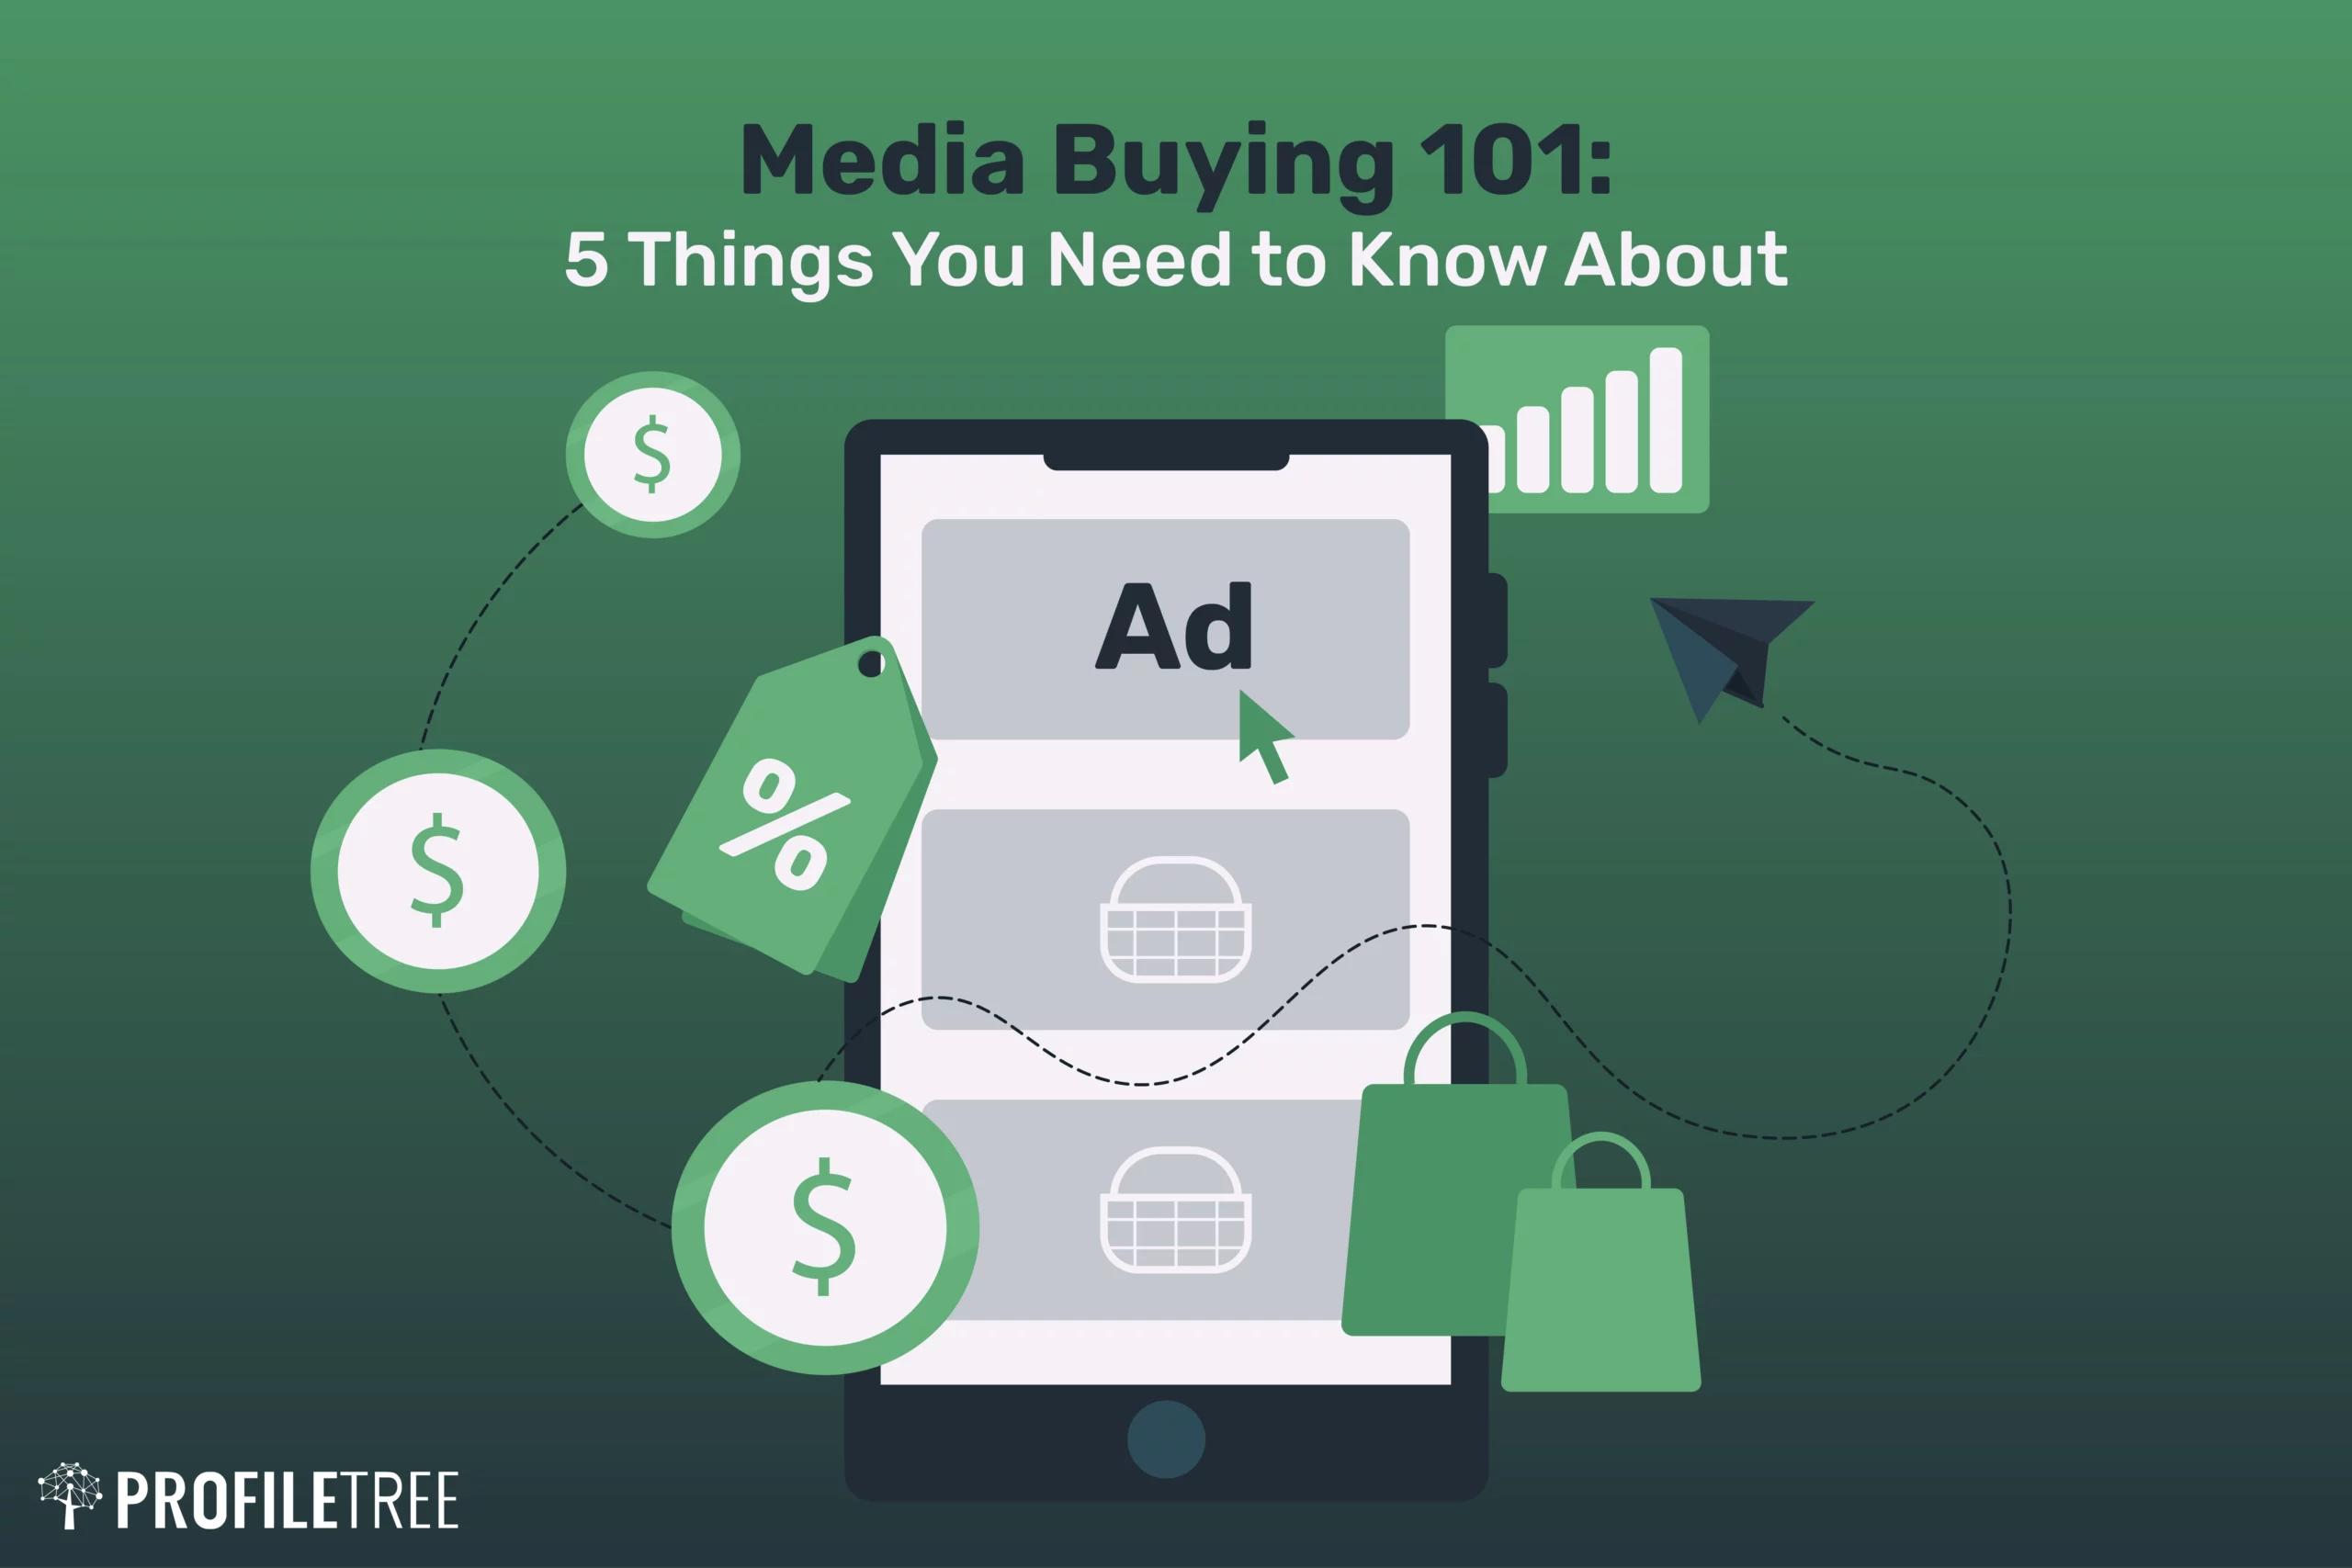 Media Buying 101 5 Things You Need to Know About